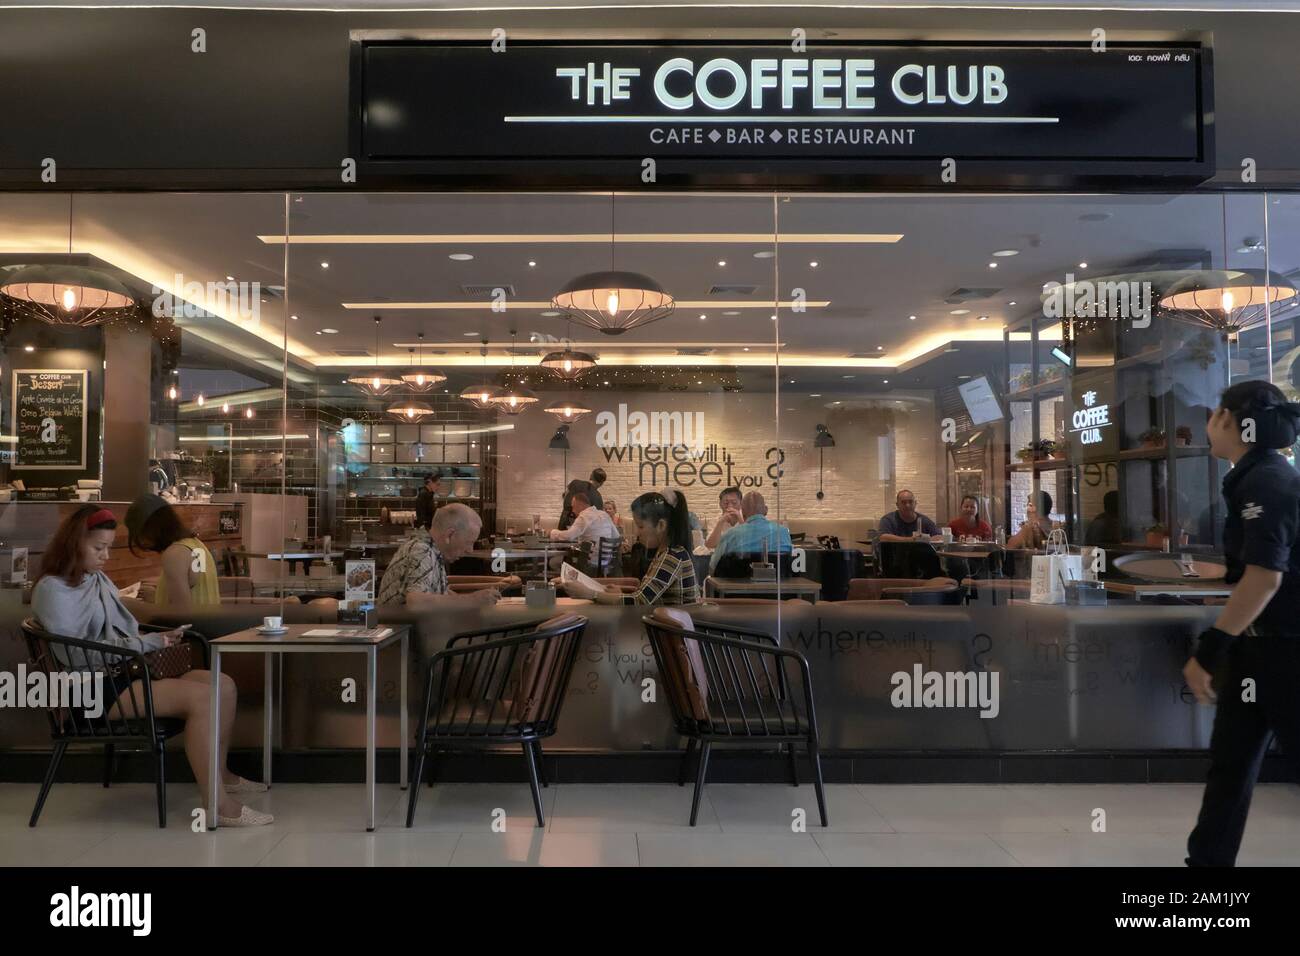 The Coffee Club cafe, bar and restaurant located in the interior of Royal Garden mall Pattaya Thailand Southeast Asia Stock Photo